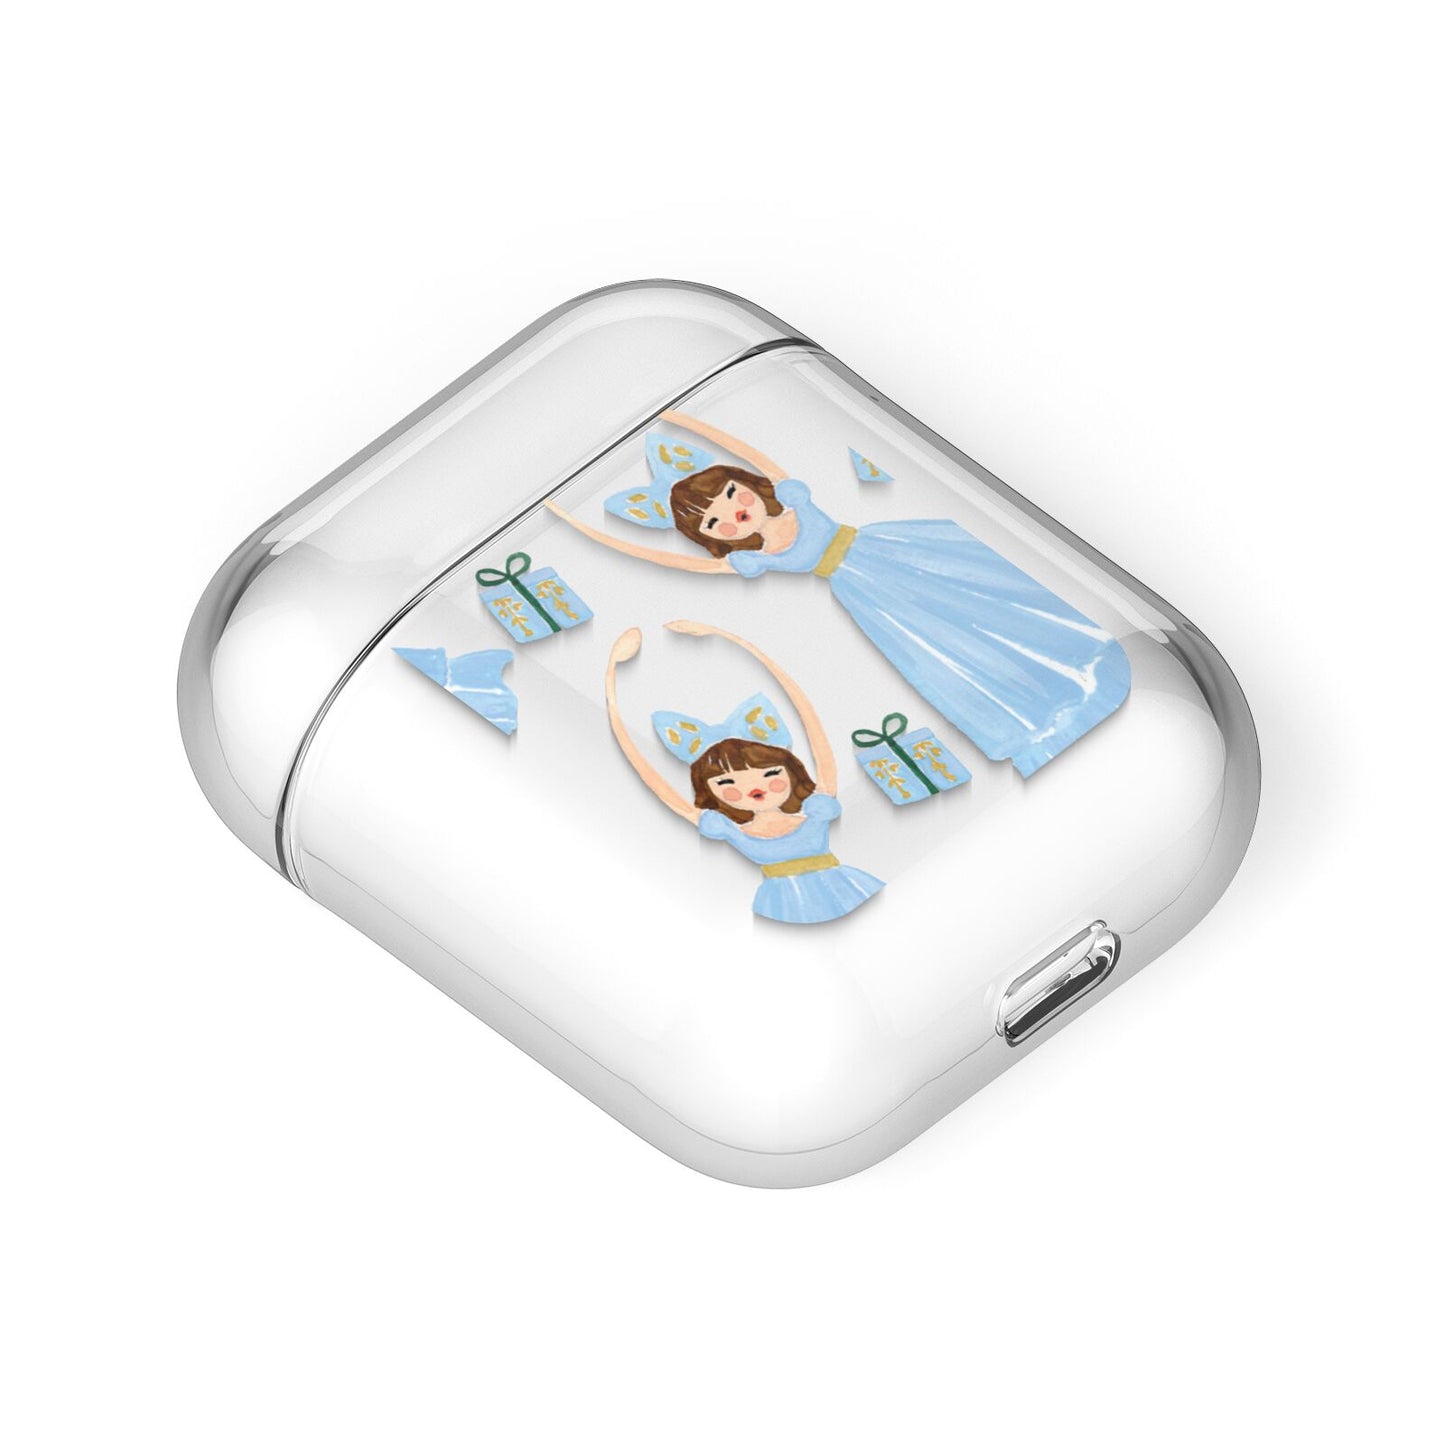 Christmas ballerina present AirPods Case Laid Flat